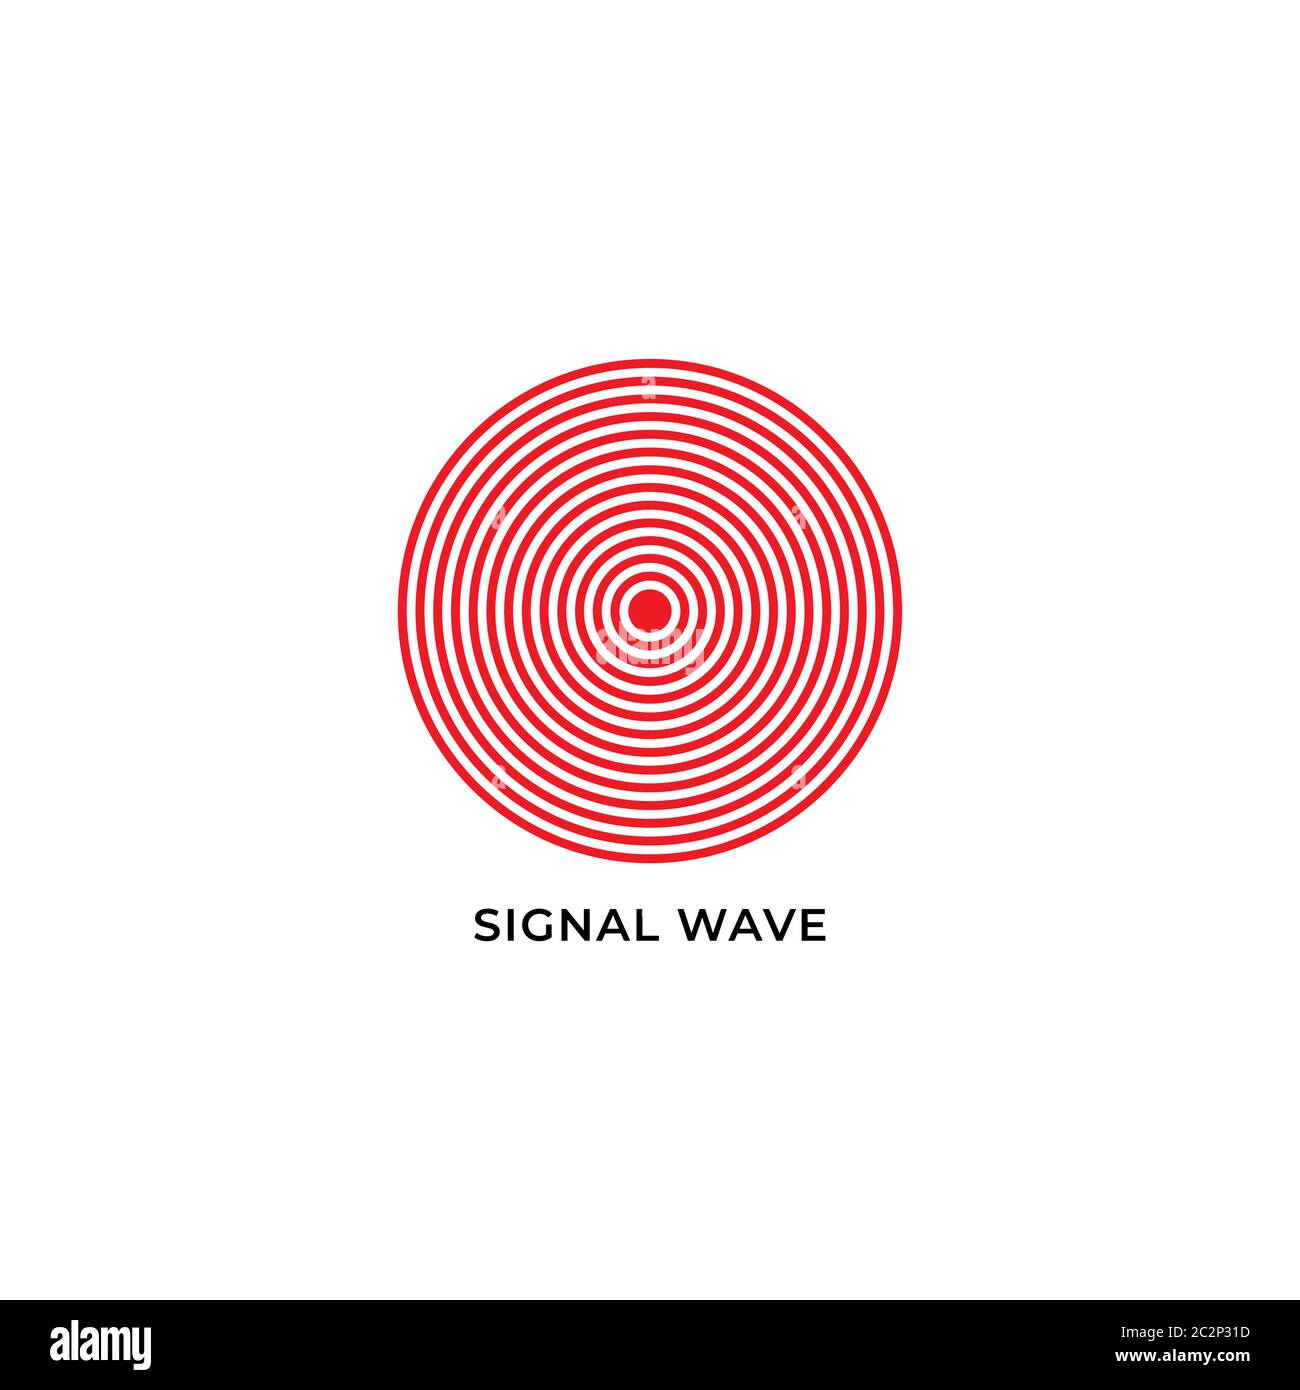 wave propagation vector illustration isolated on white background. logo icon design template. red color theme Stock Vector